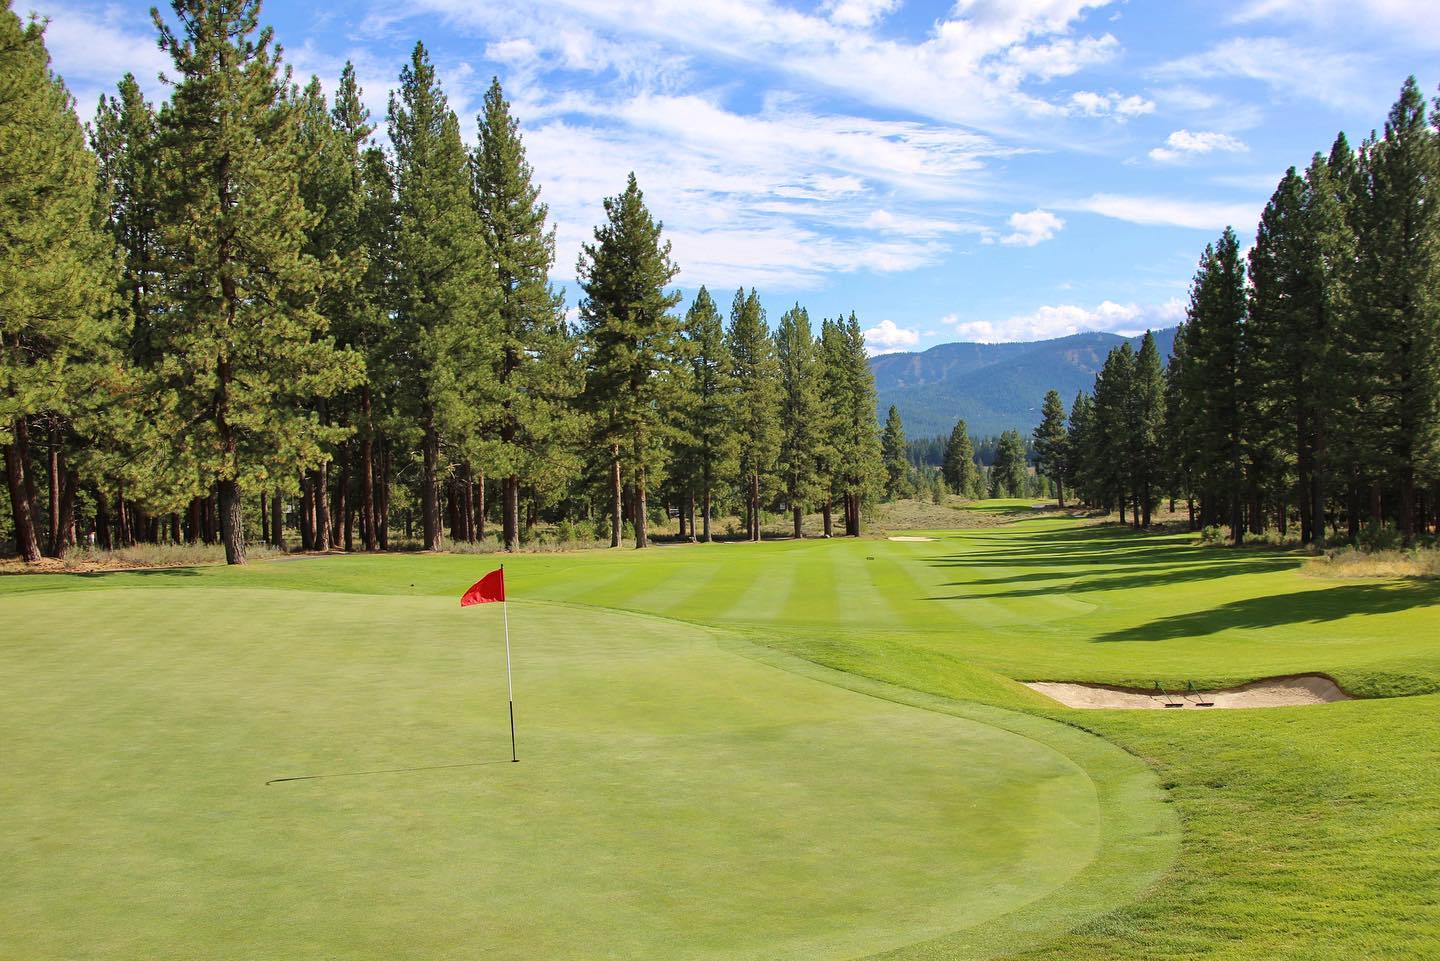 <p>Old Greenwood, a Jack Nicklaus signature design at Tahoe Mountain Club, has hosted the PGA Tour’s Barracuda Championship since 2020. The course offers a challenging yet scenic layout through pine forests, meadows, and hills.</p>